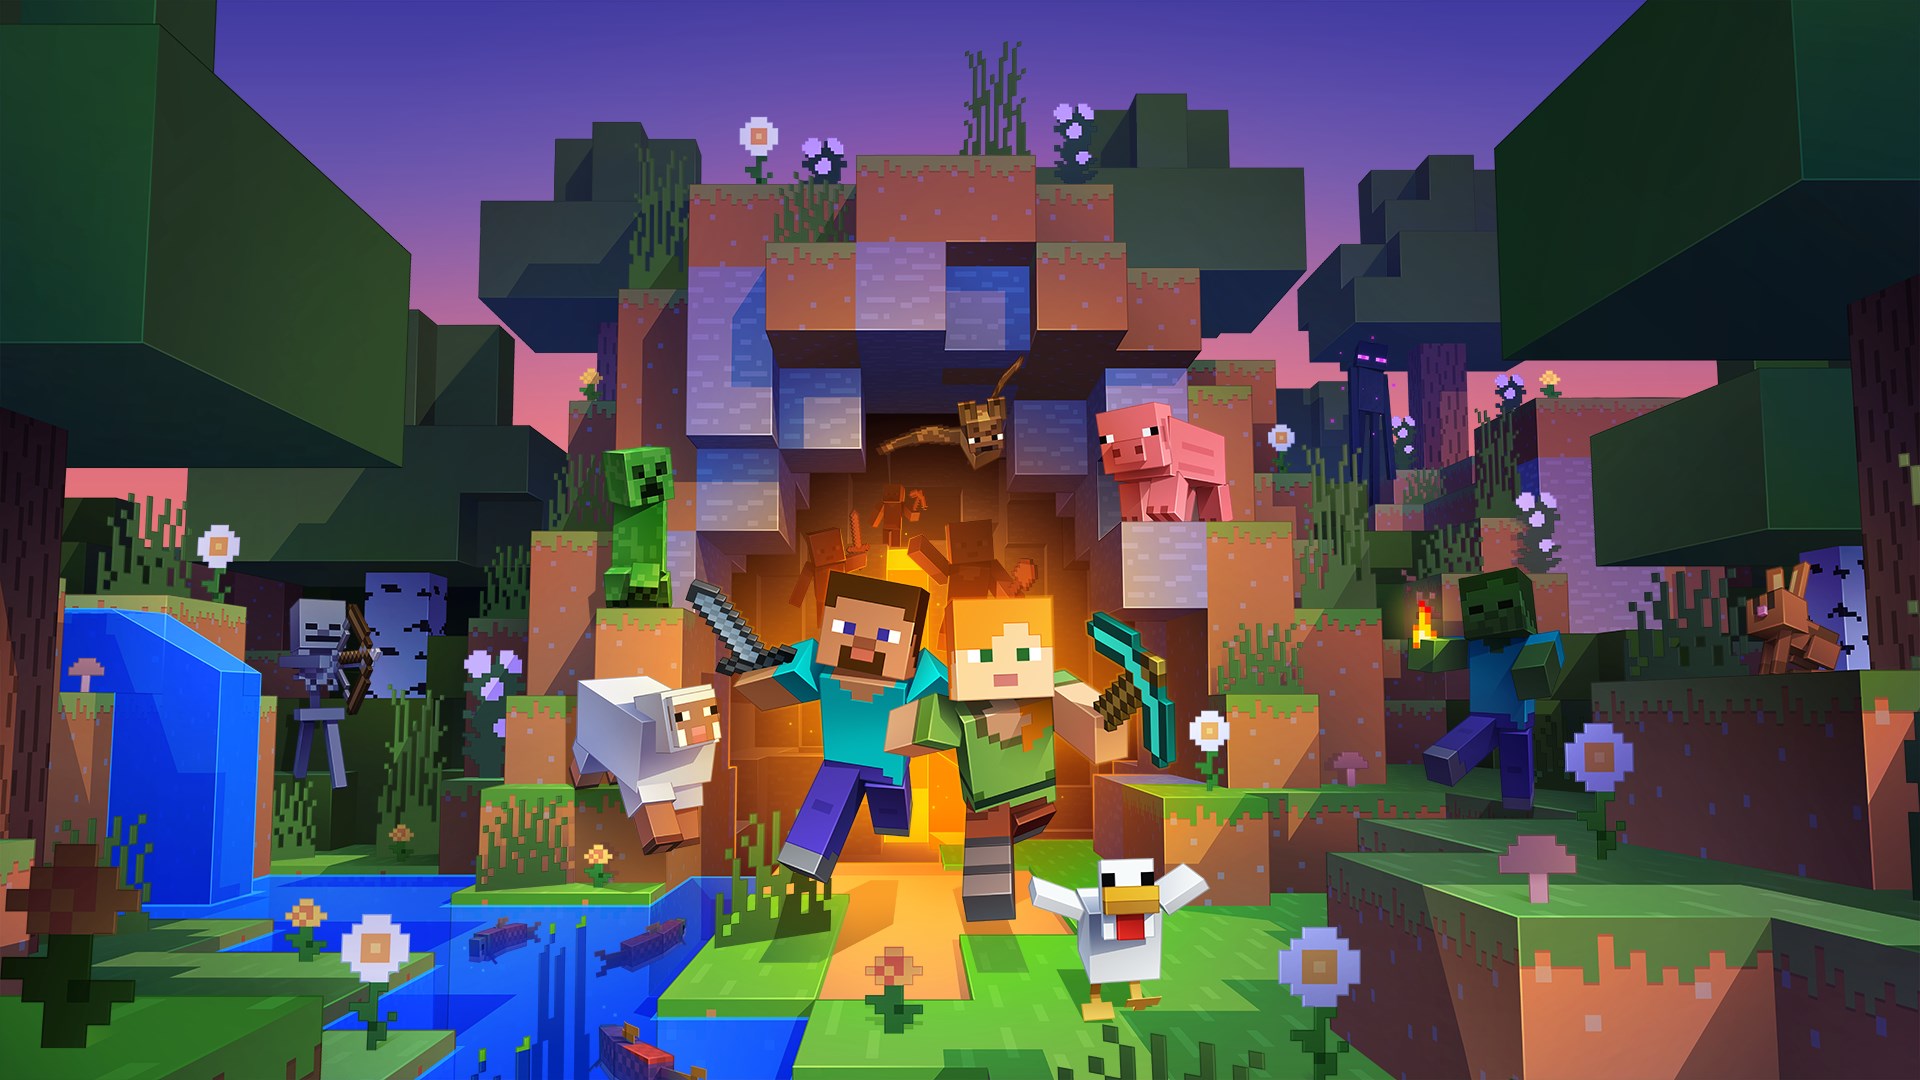 Minecraft Trial Online on  - Play the Trial Version of the Popular  Survival Crafting Game